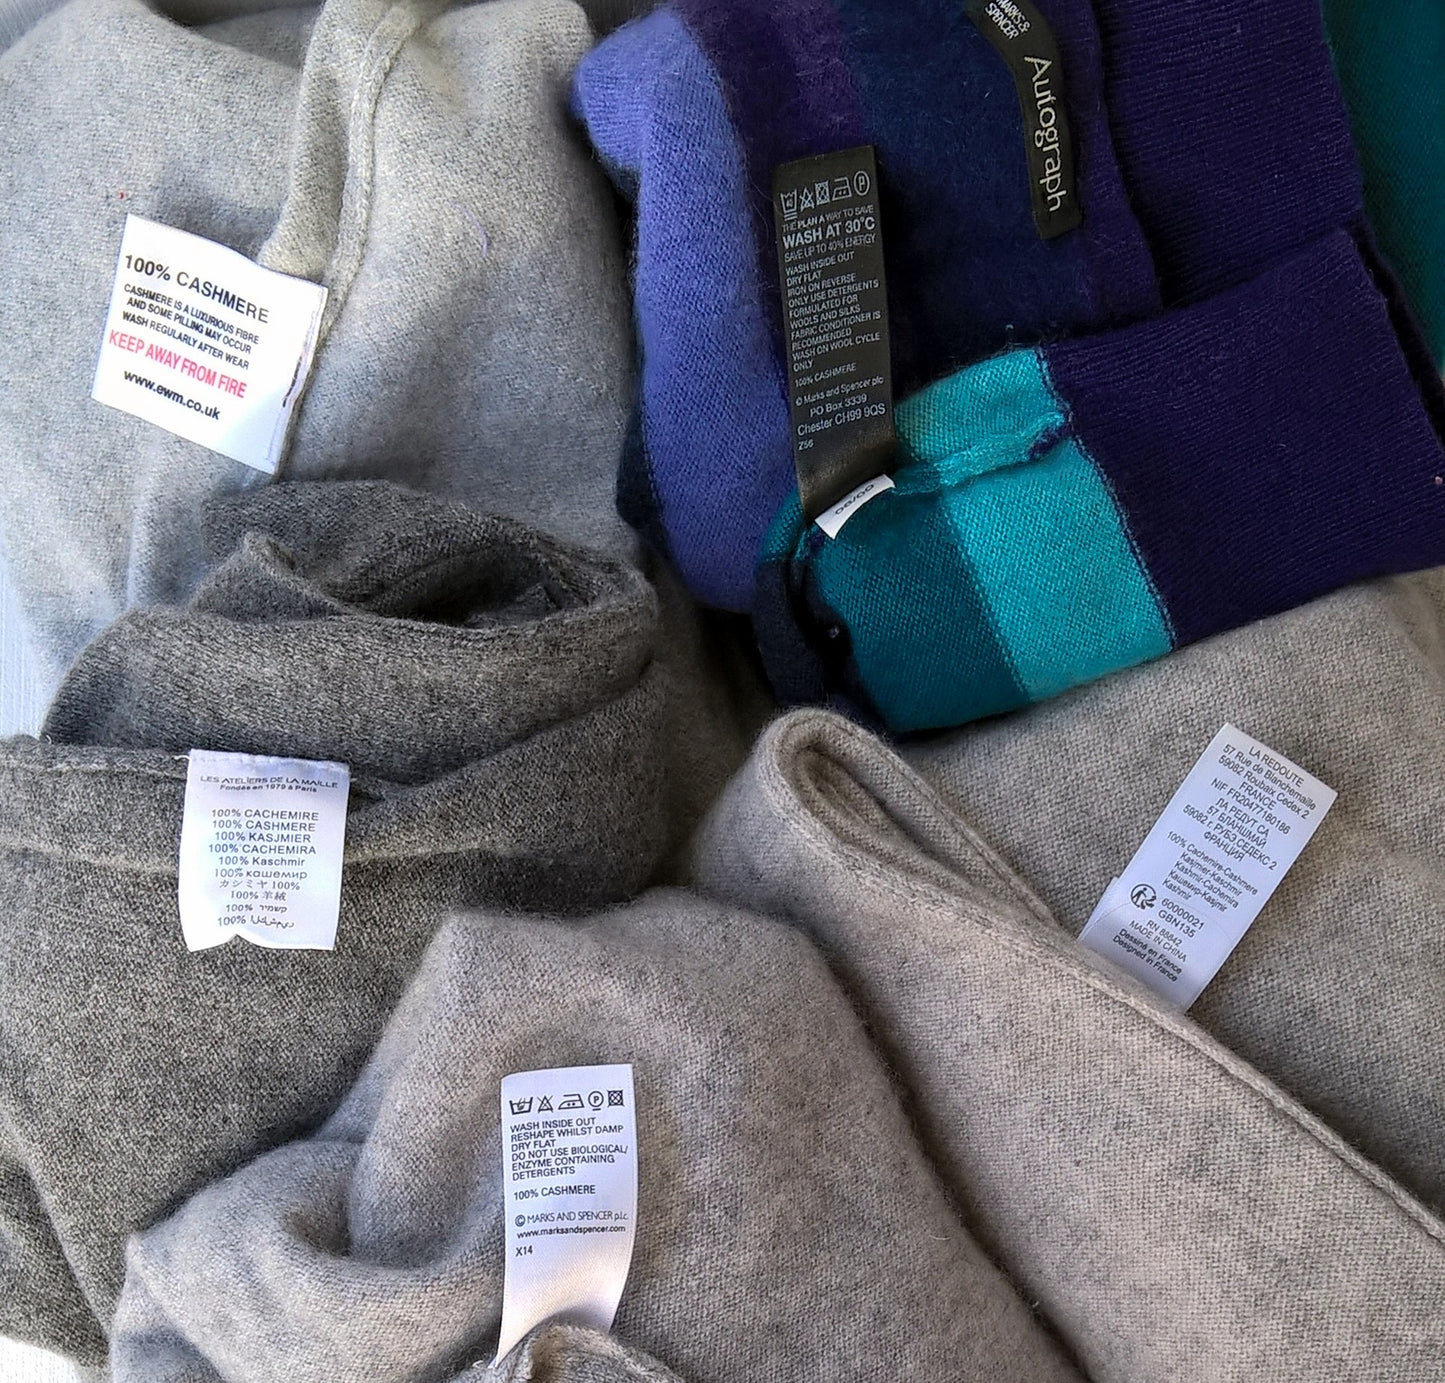 A variety of preloved cashmere sweaters for up-cycling